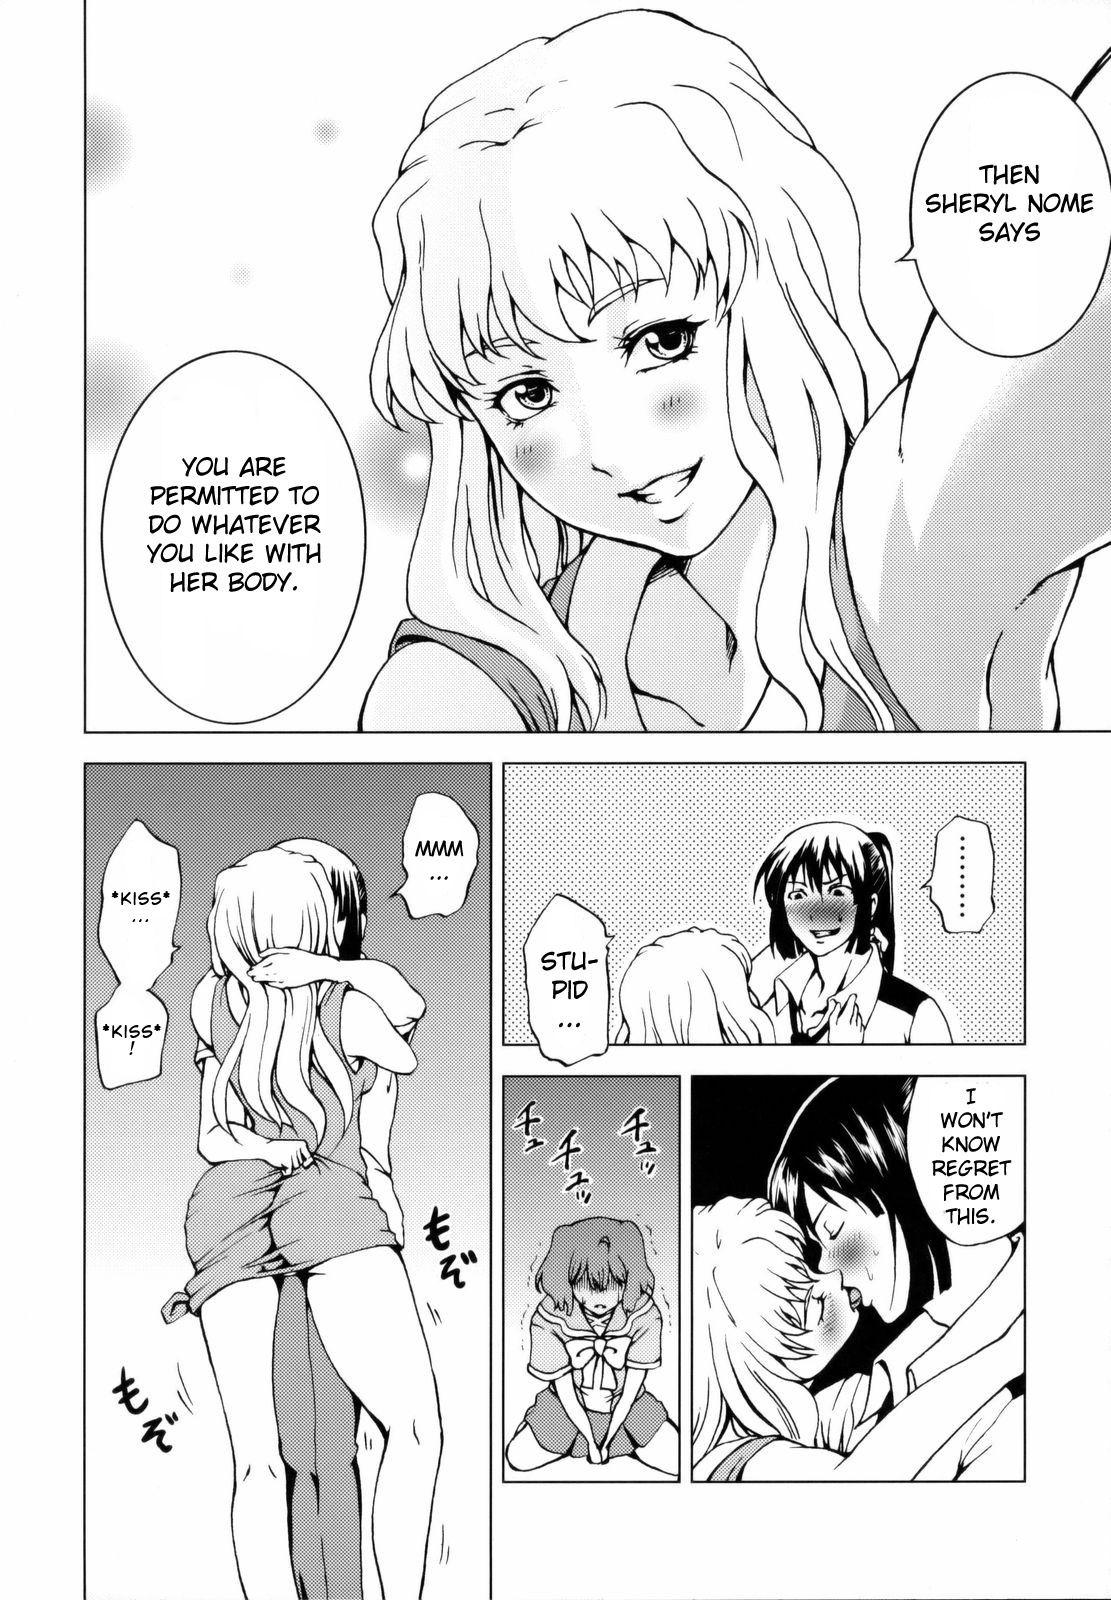 Jacking Off First Lady - Macross frontier Off - Page 9